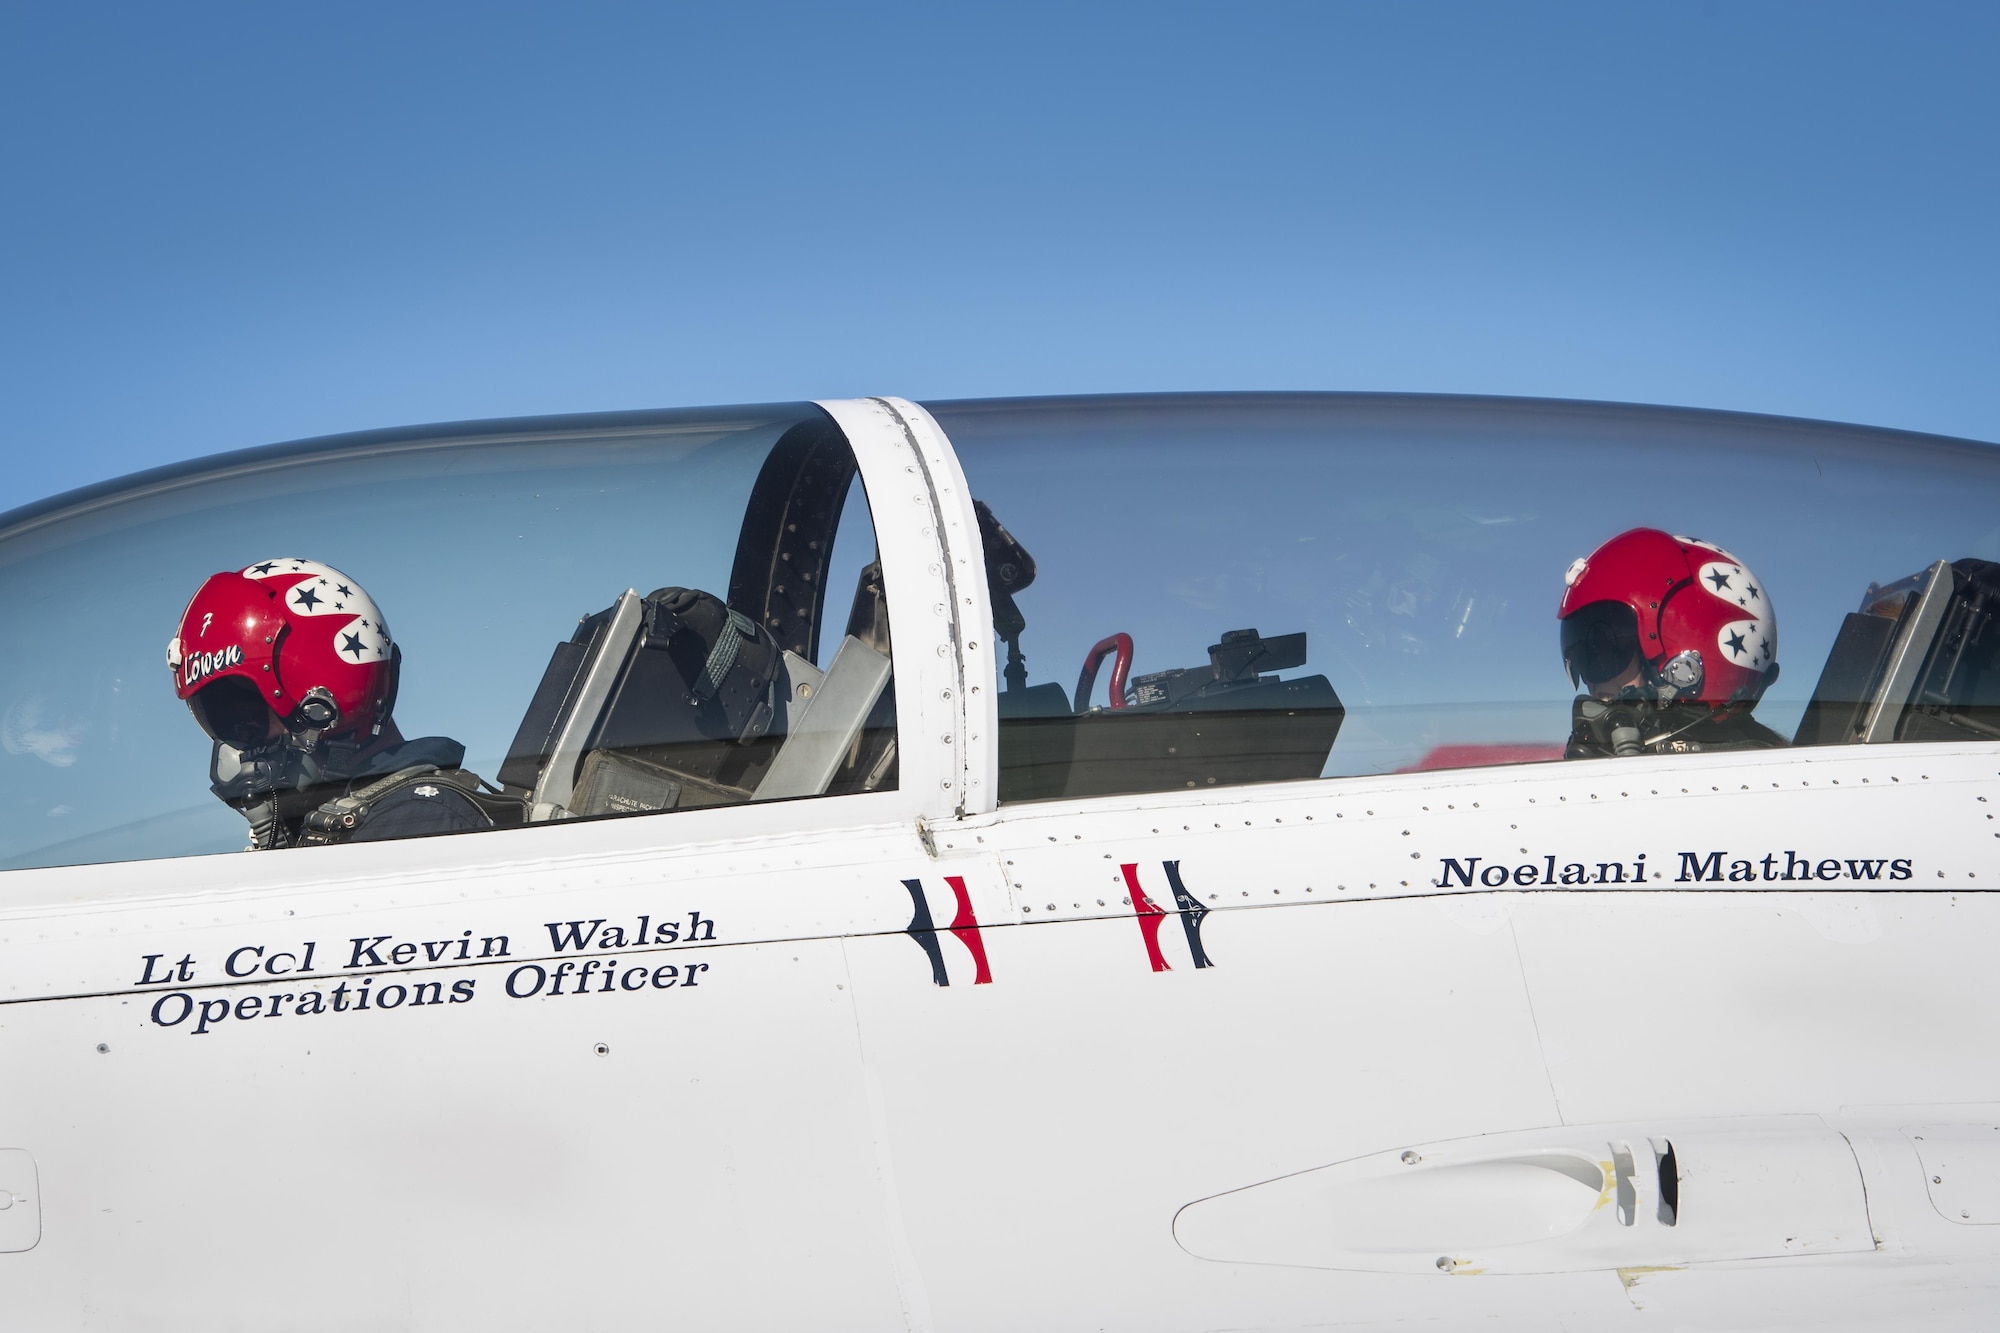 Noelani Mathews, multimedia journalist, and Lt. Col. Kevin Walsh, U.S. Air Force Thunderbird pilot No. 7, sit in the cockpit before her media flight in an F-16D Fighting Falcon, Oct. 27, 2017, at Moody Air Force Base, Ga. The Thunderbirds, based out of Nellis Air Force Base, Nev., are the Air Force’s premier aerial demonstration team, performing at air shows and special events worldwide. (U.S. Air Force photo by Senior Airman Janiqua P. Robinson)